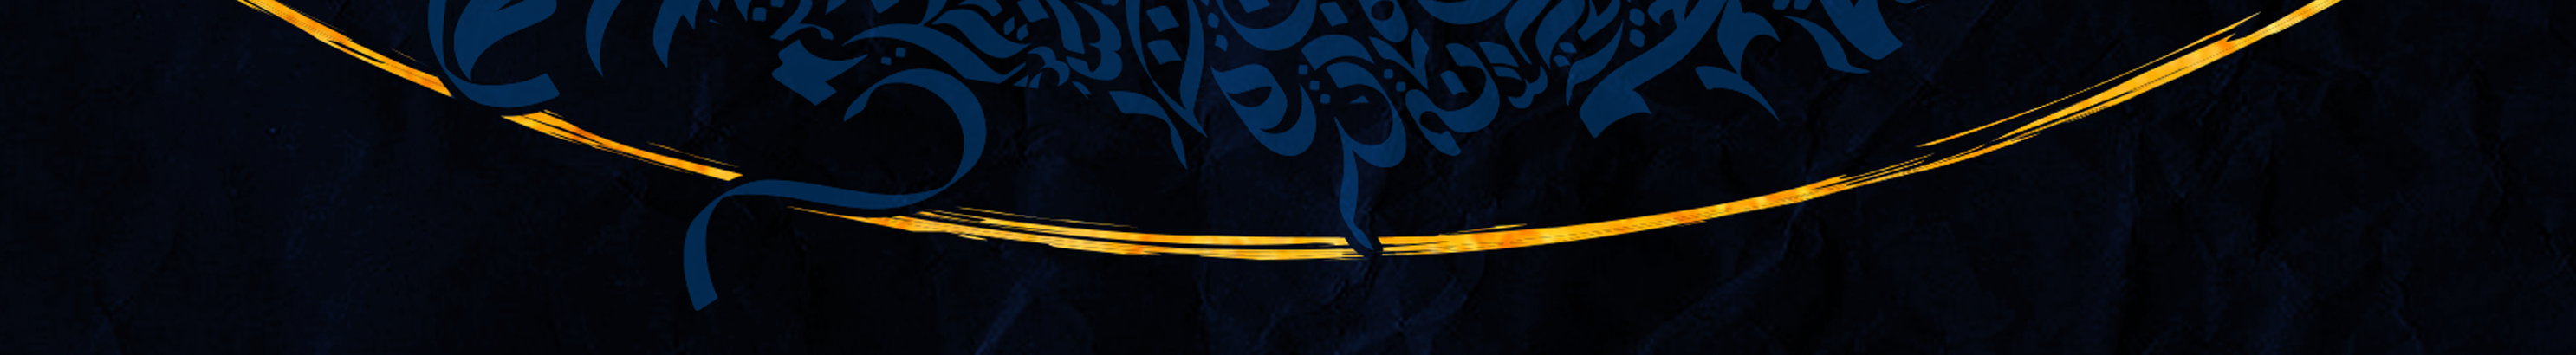 Mohamad Mnawar's profile banner